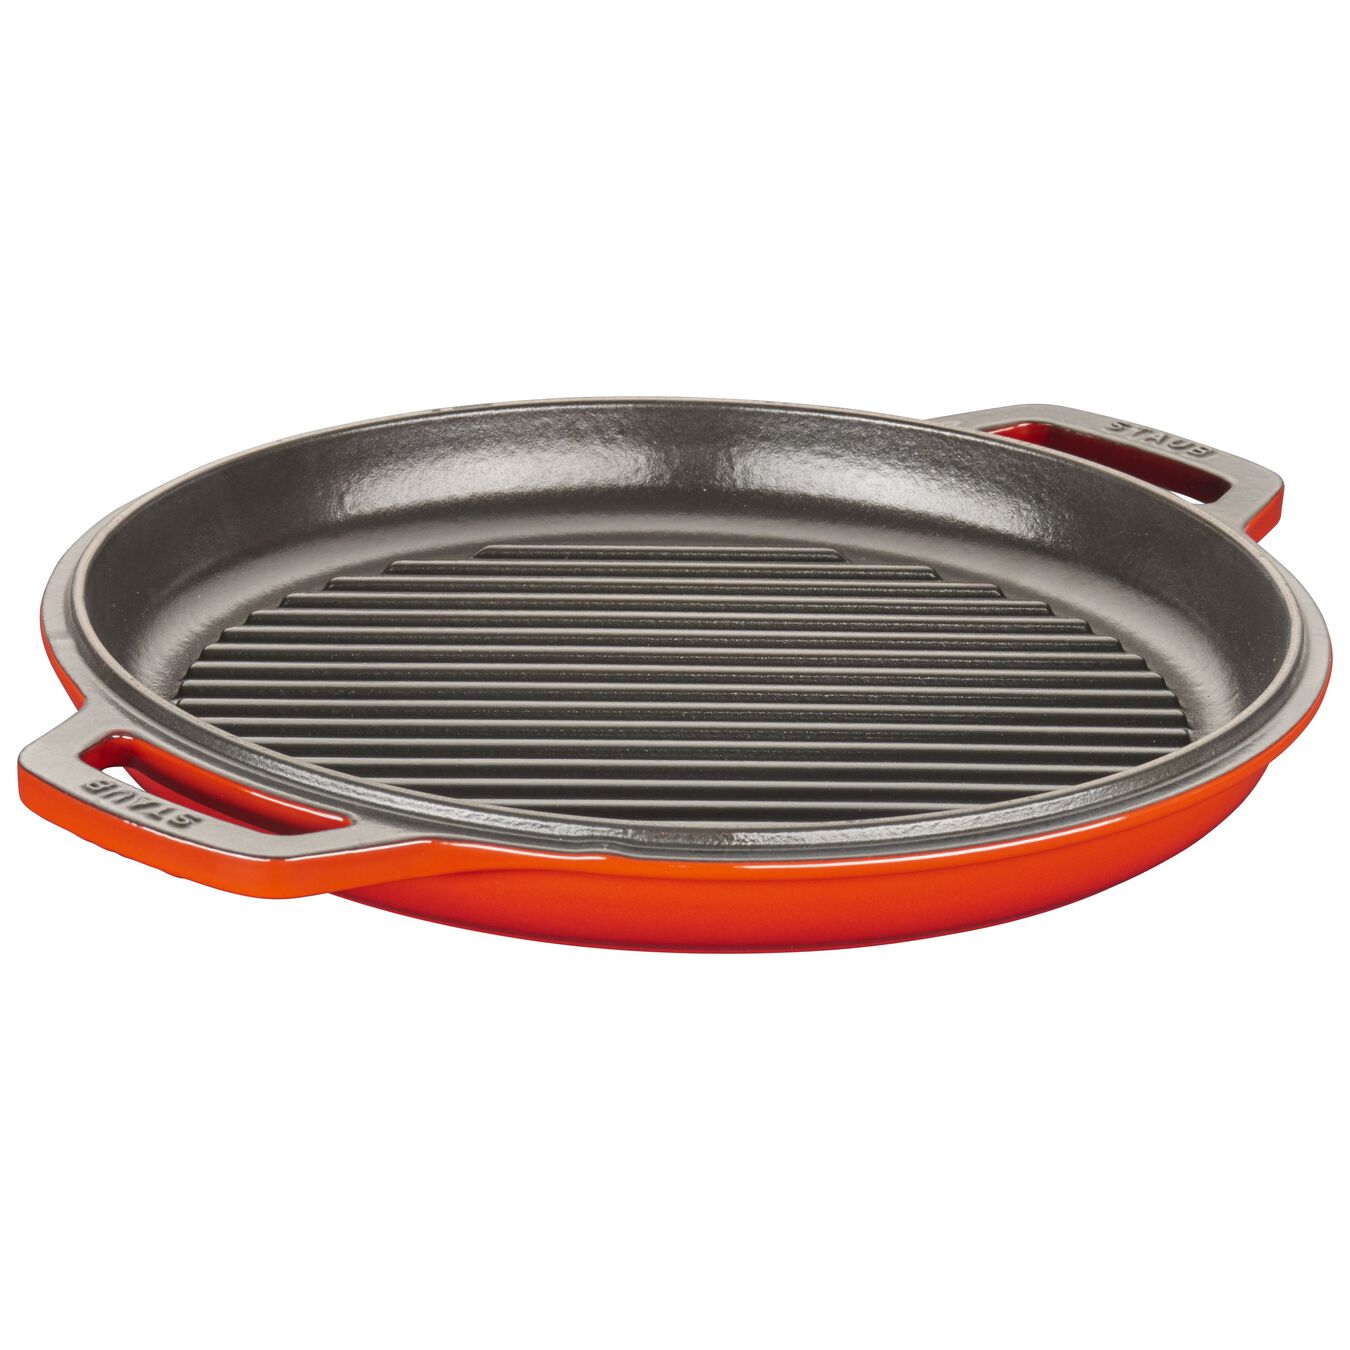 6 l cast iron round Braise + Grill, cherry - Visual Imperfections,,large 4